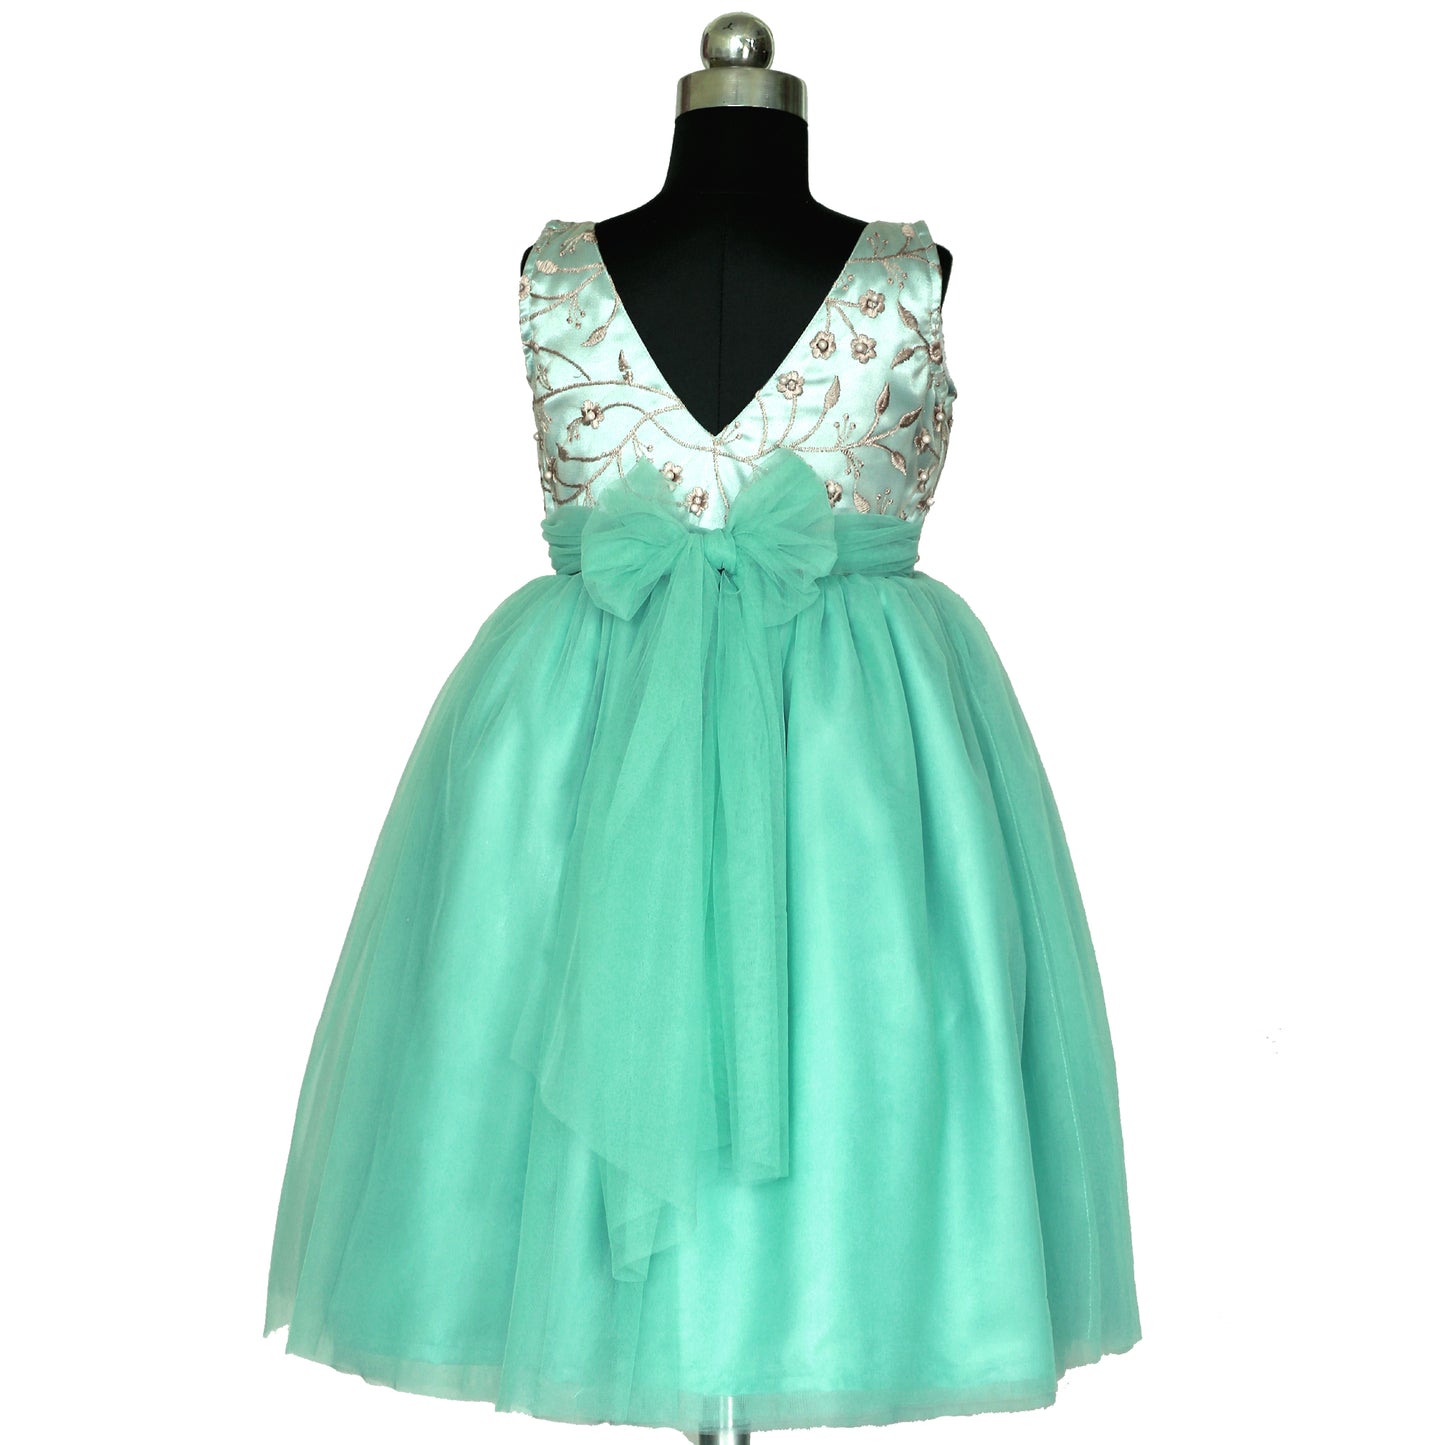 HEYKIDOO Floral Embroidered Girls Party Frock-Sea Green birthday casual party wear frock dresses kids elegant comfortable collection.